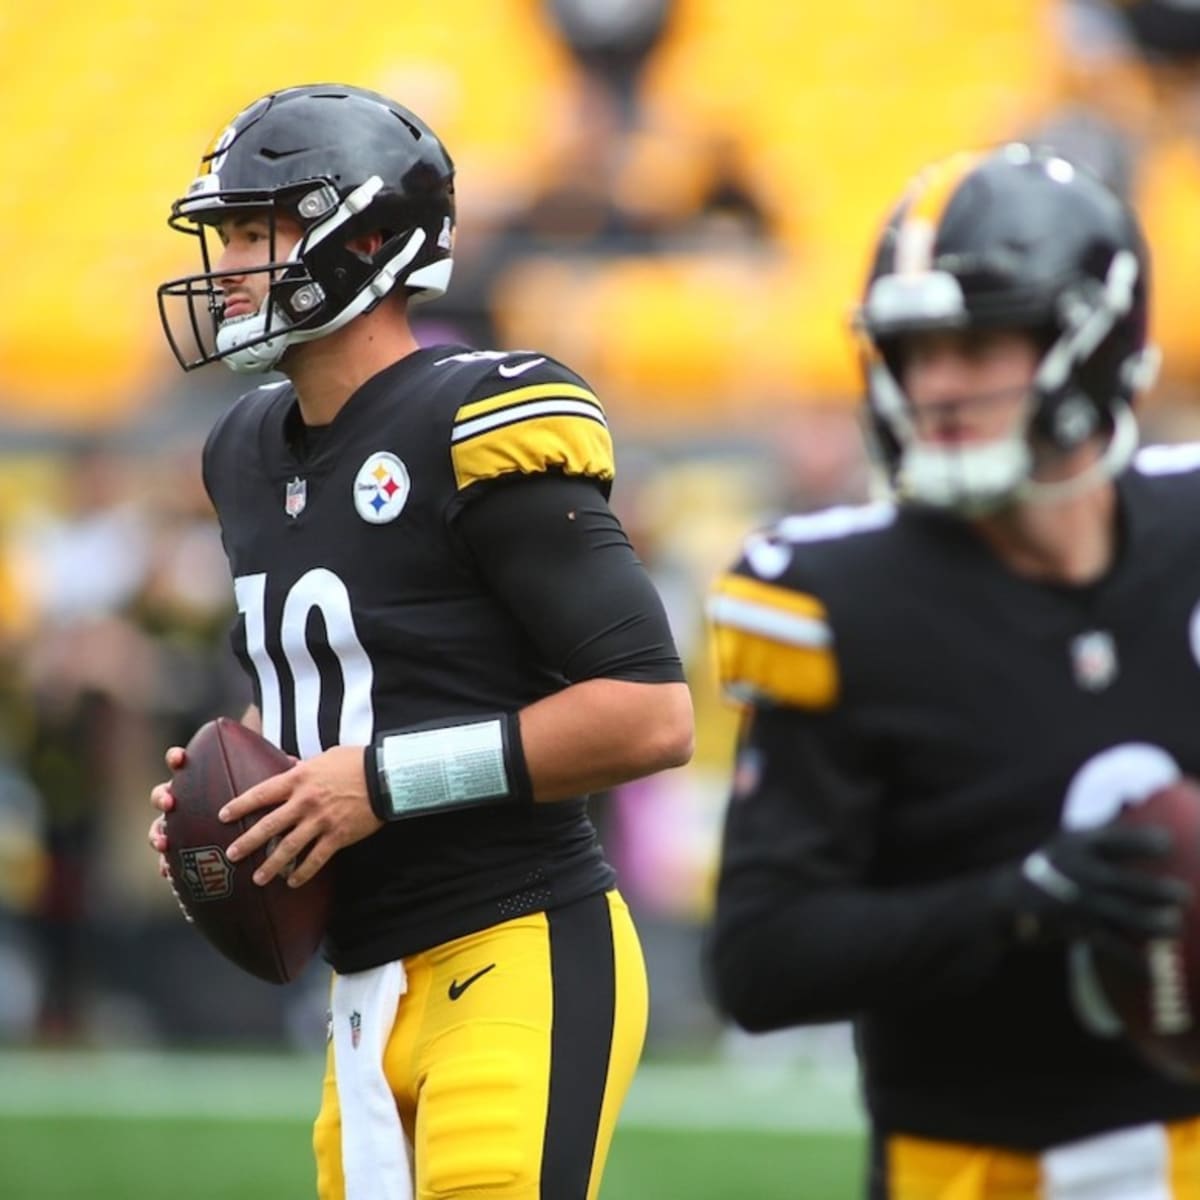 5 Takeaways: How Washington Handed the Steelers Their First Defeat